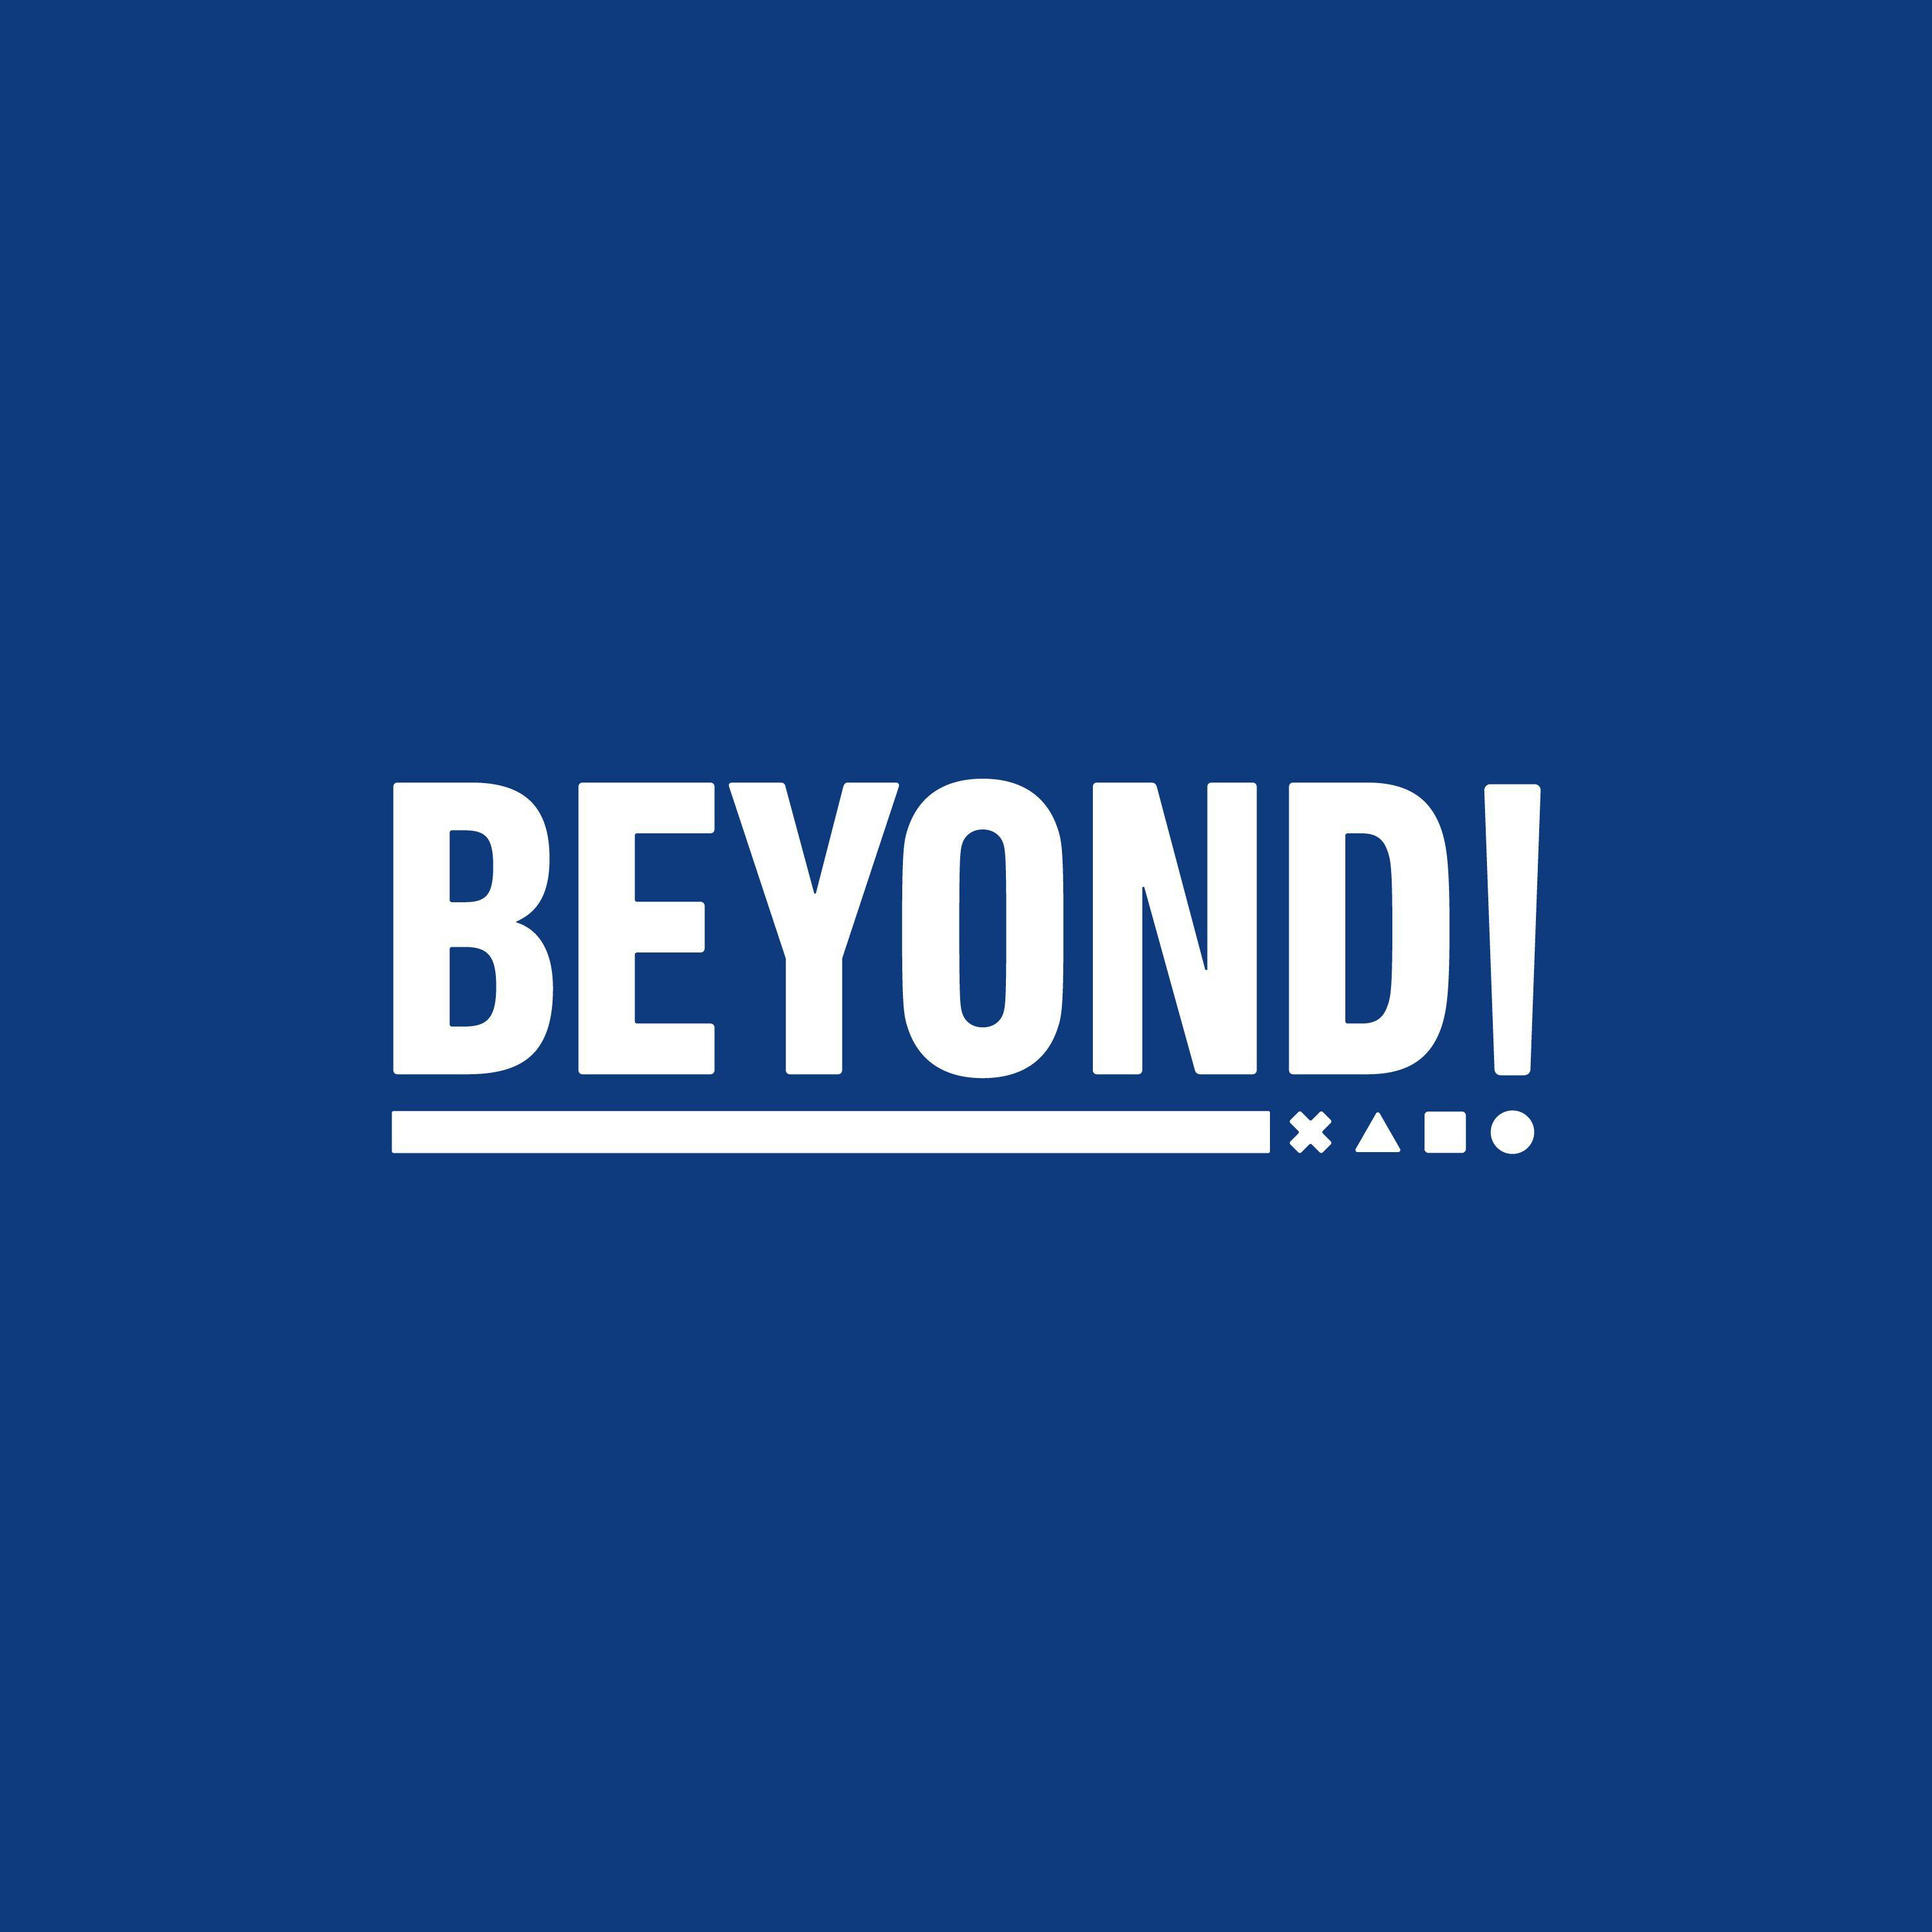 25 PS5 Games on the Way From PlayStation - Podcast Beyond! Episode 700